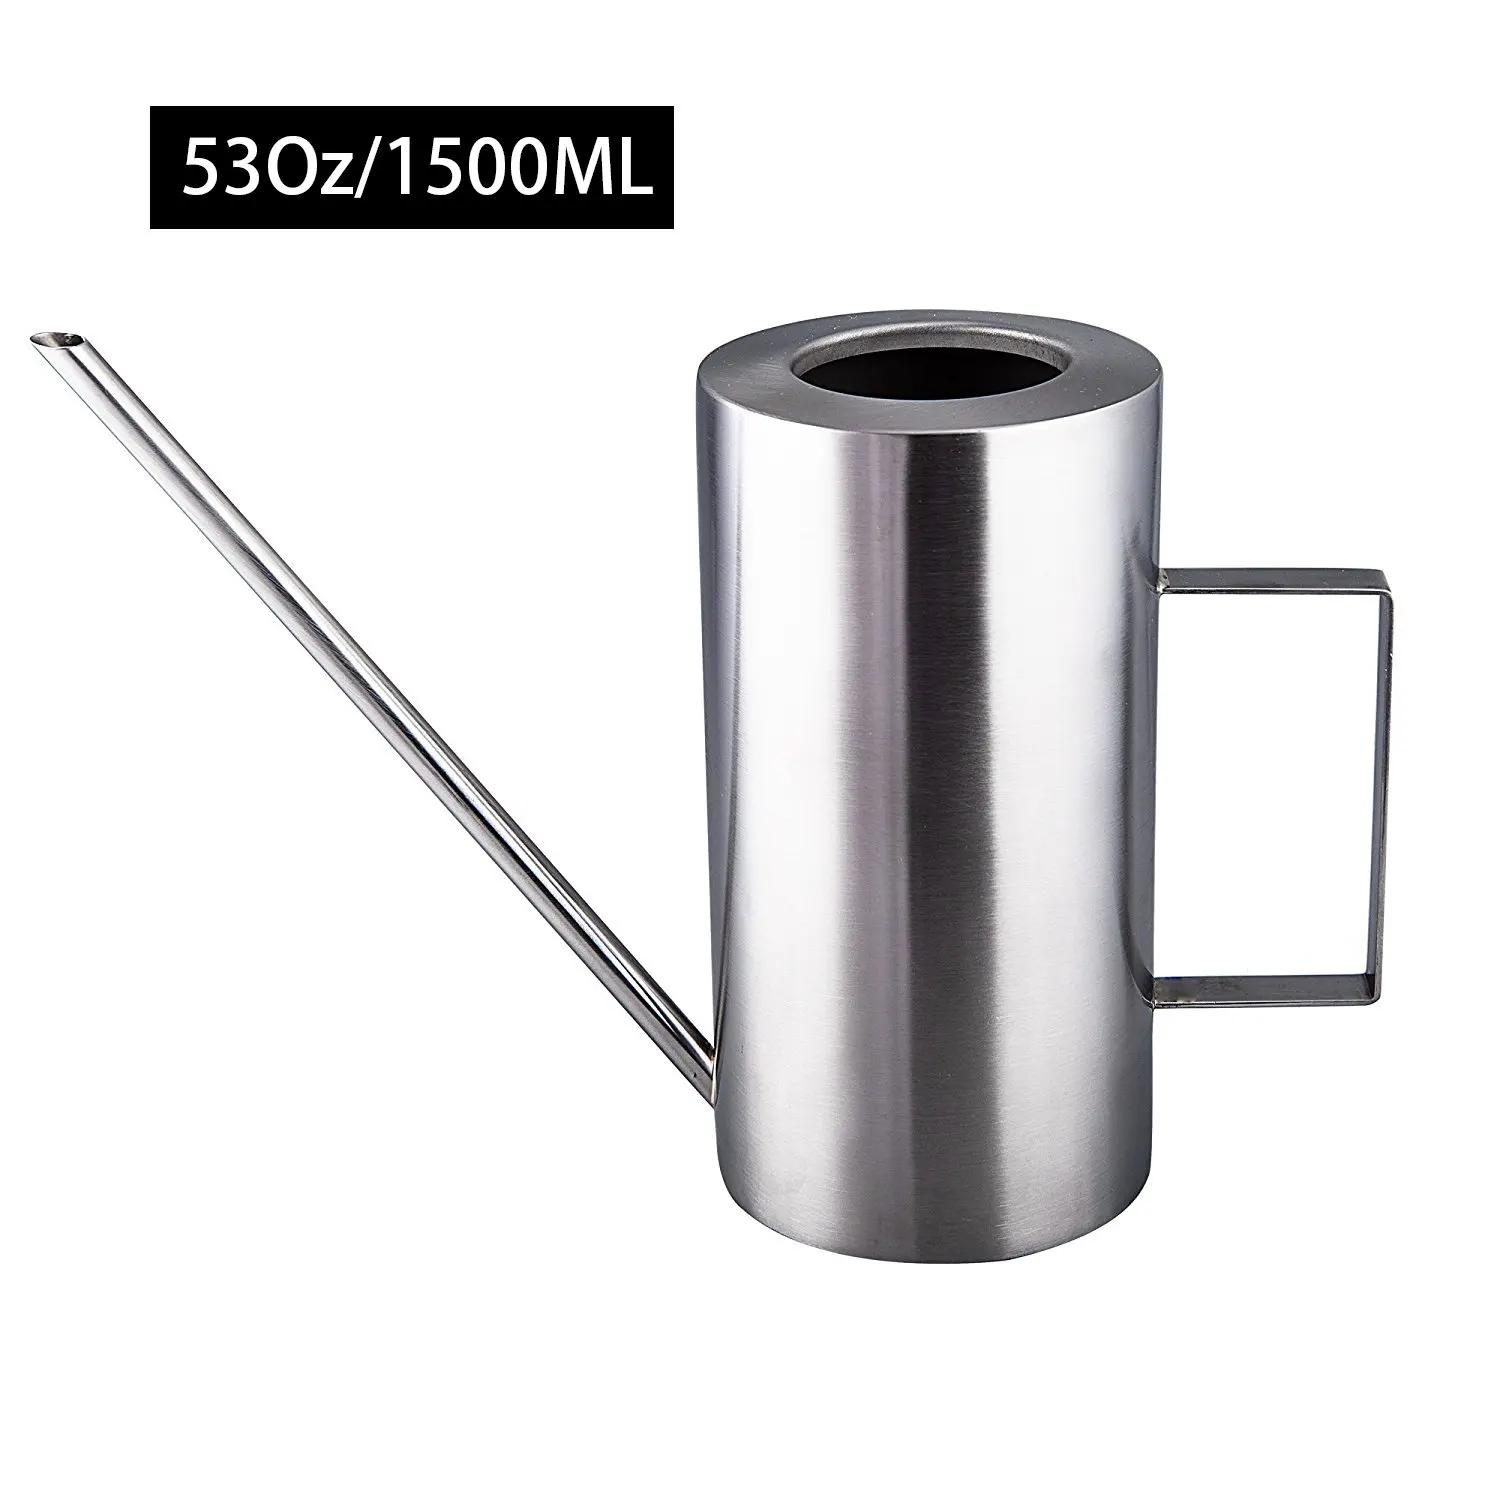 IMEEA/® Watering Can for Indoor House Plants Long Spout Brushed SUS304 Stainless Steel Watering Pot 45oz//1.3L